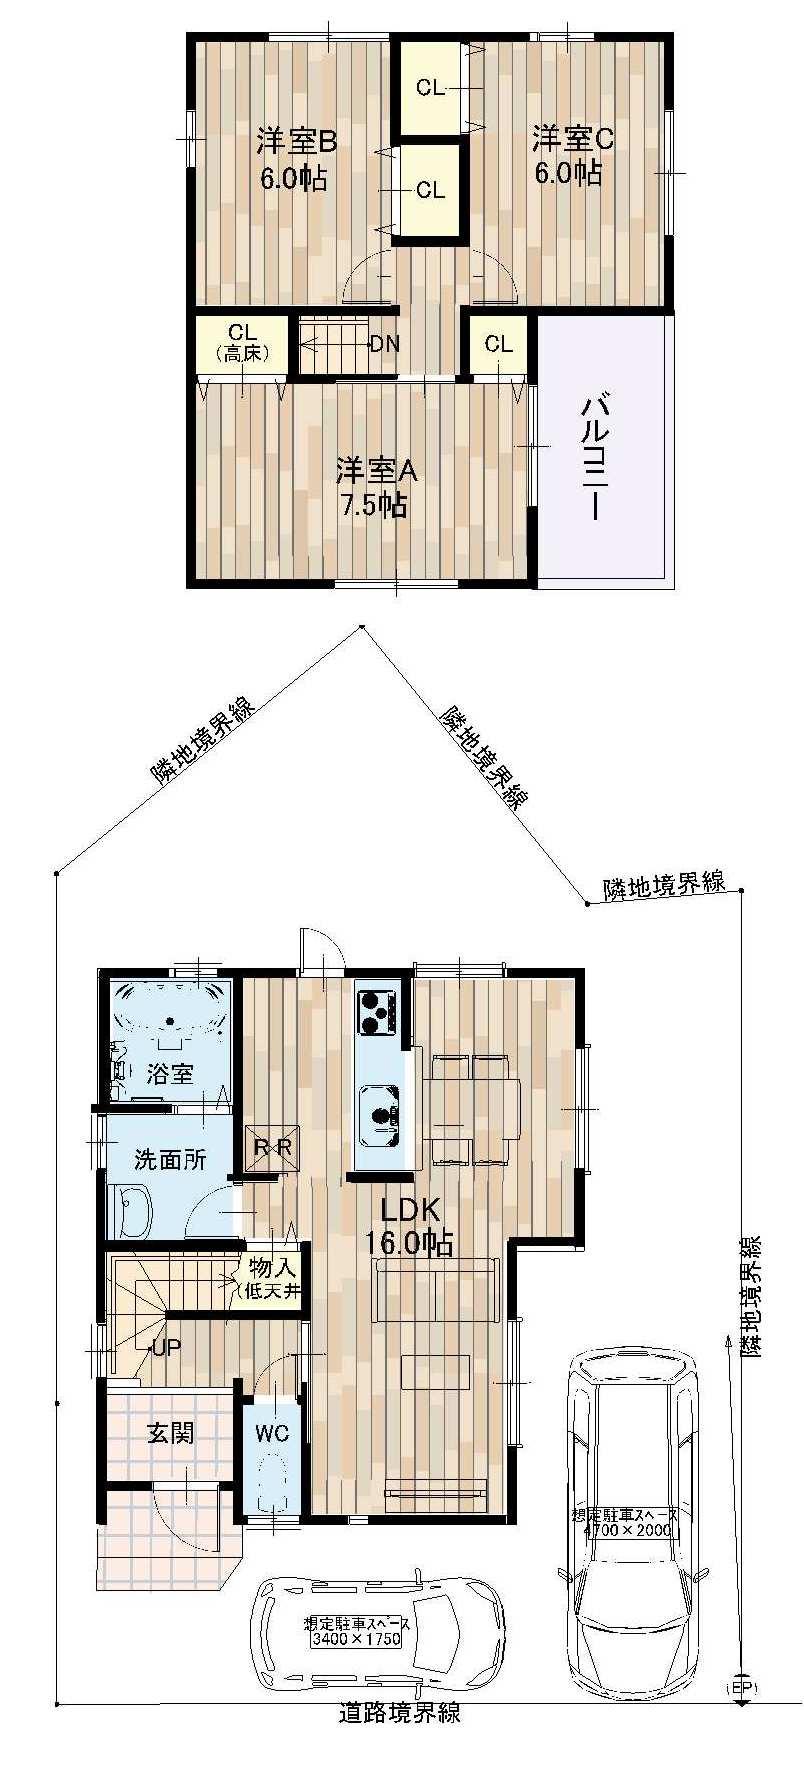 Floor plan. ← is a video floor plan of the model house on the left ☆ Please reference where to have taken ☆ This plan was to cherish the family of communication in a wide LDK and face-to-face kitchen. 